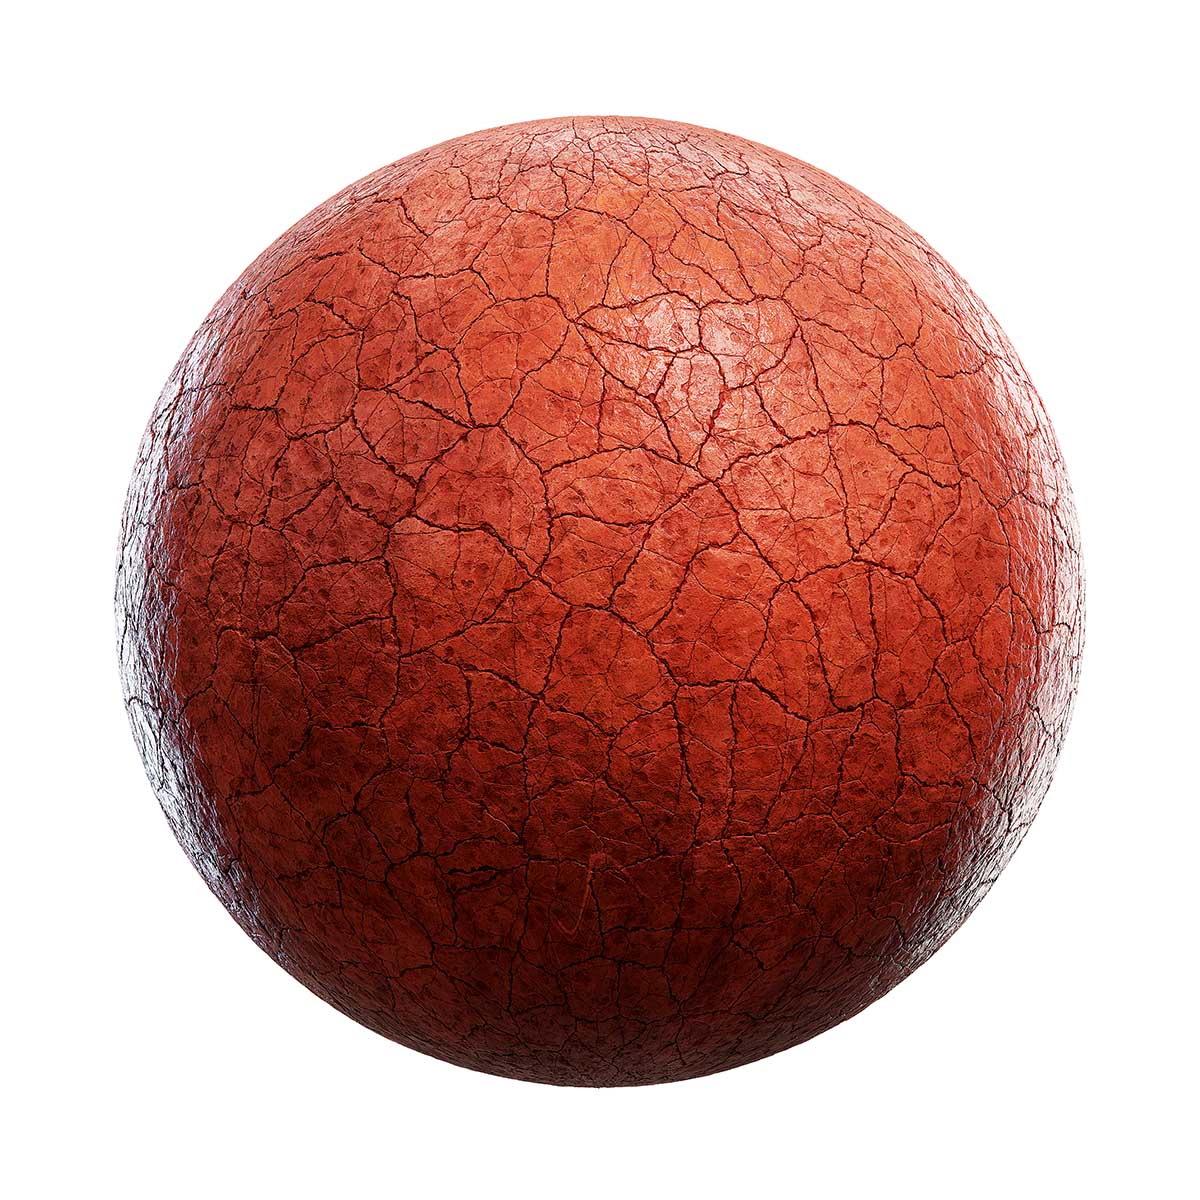 Cracked Red Clay Ground PBR Texture